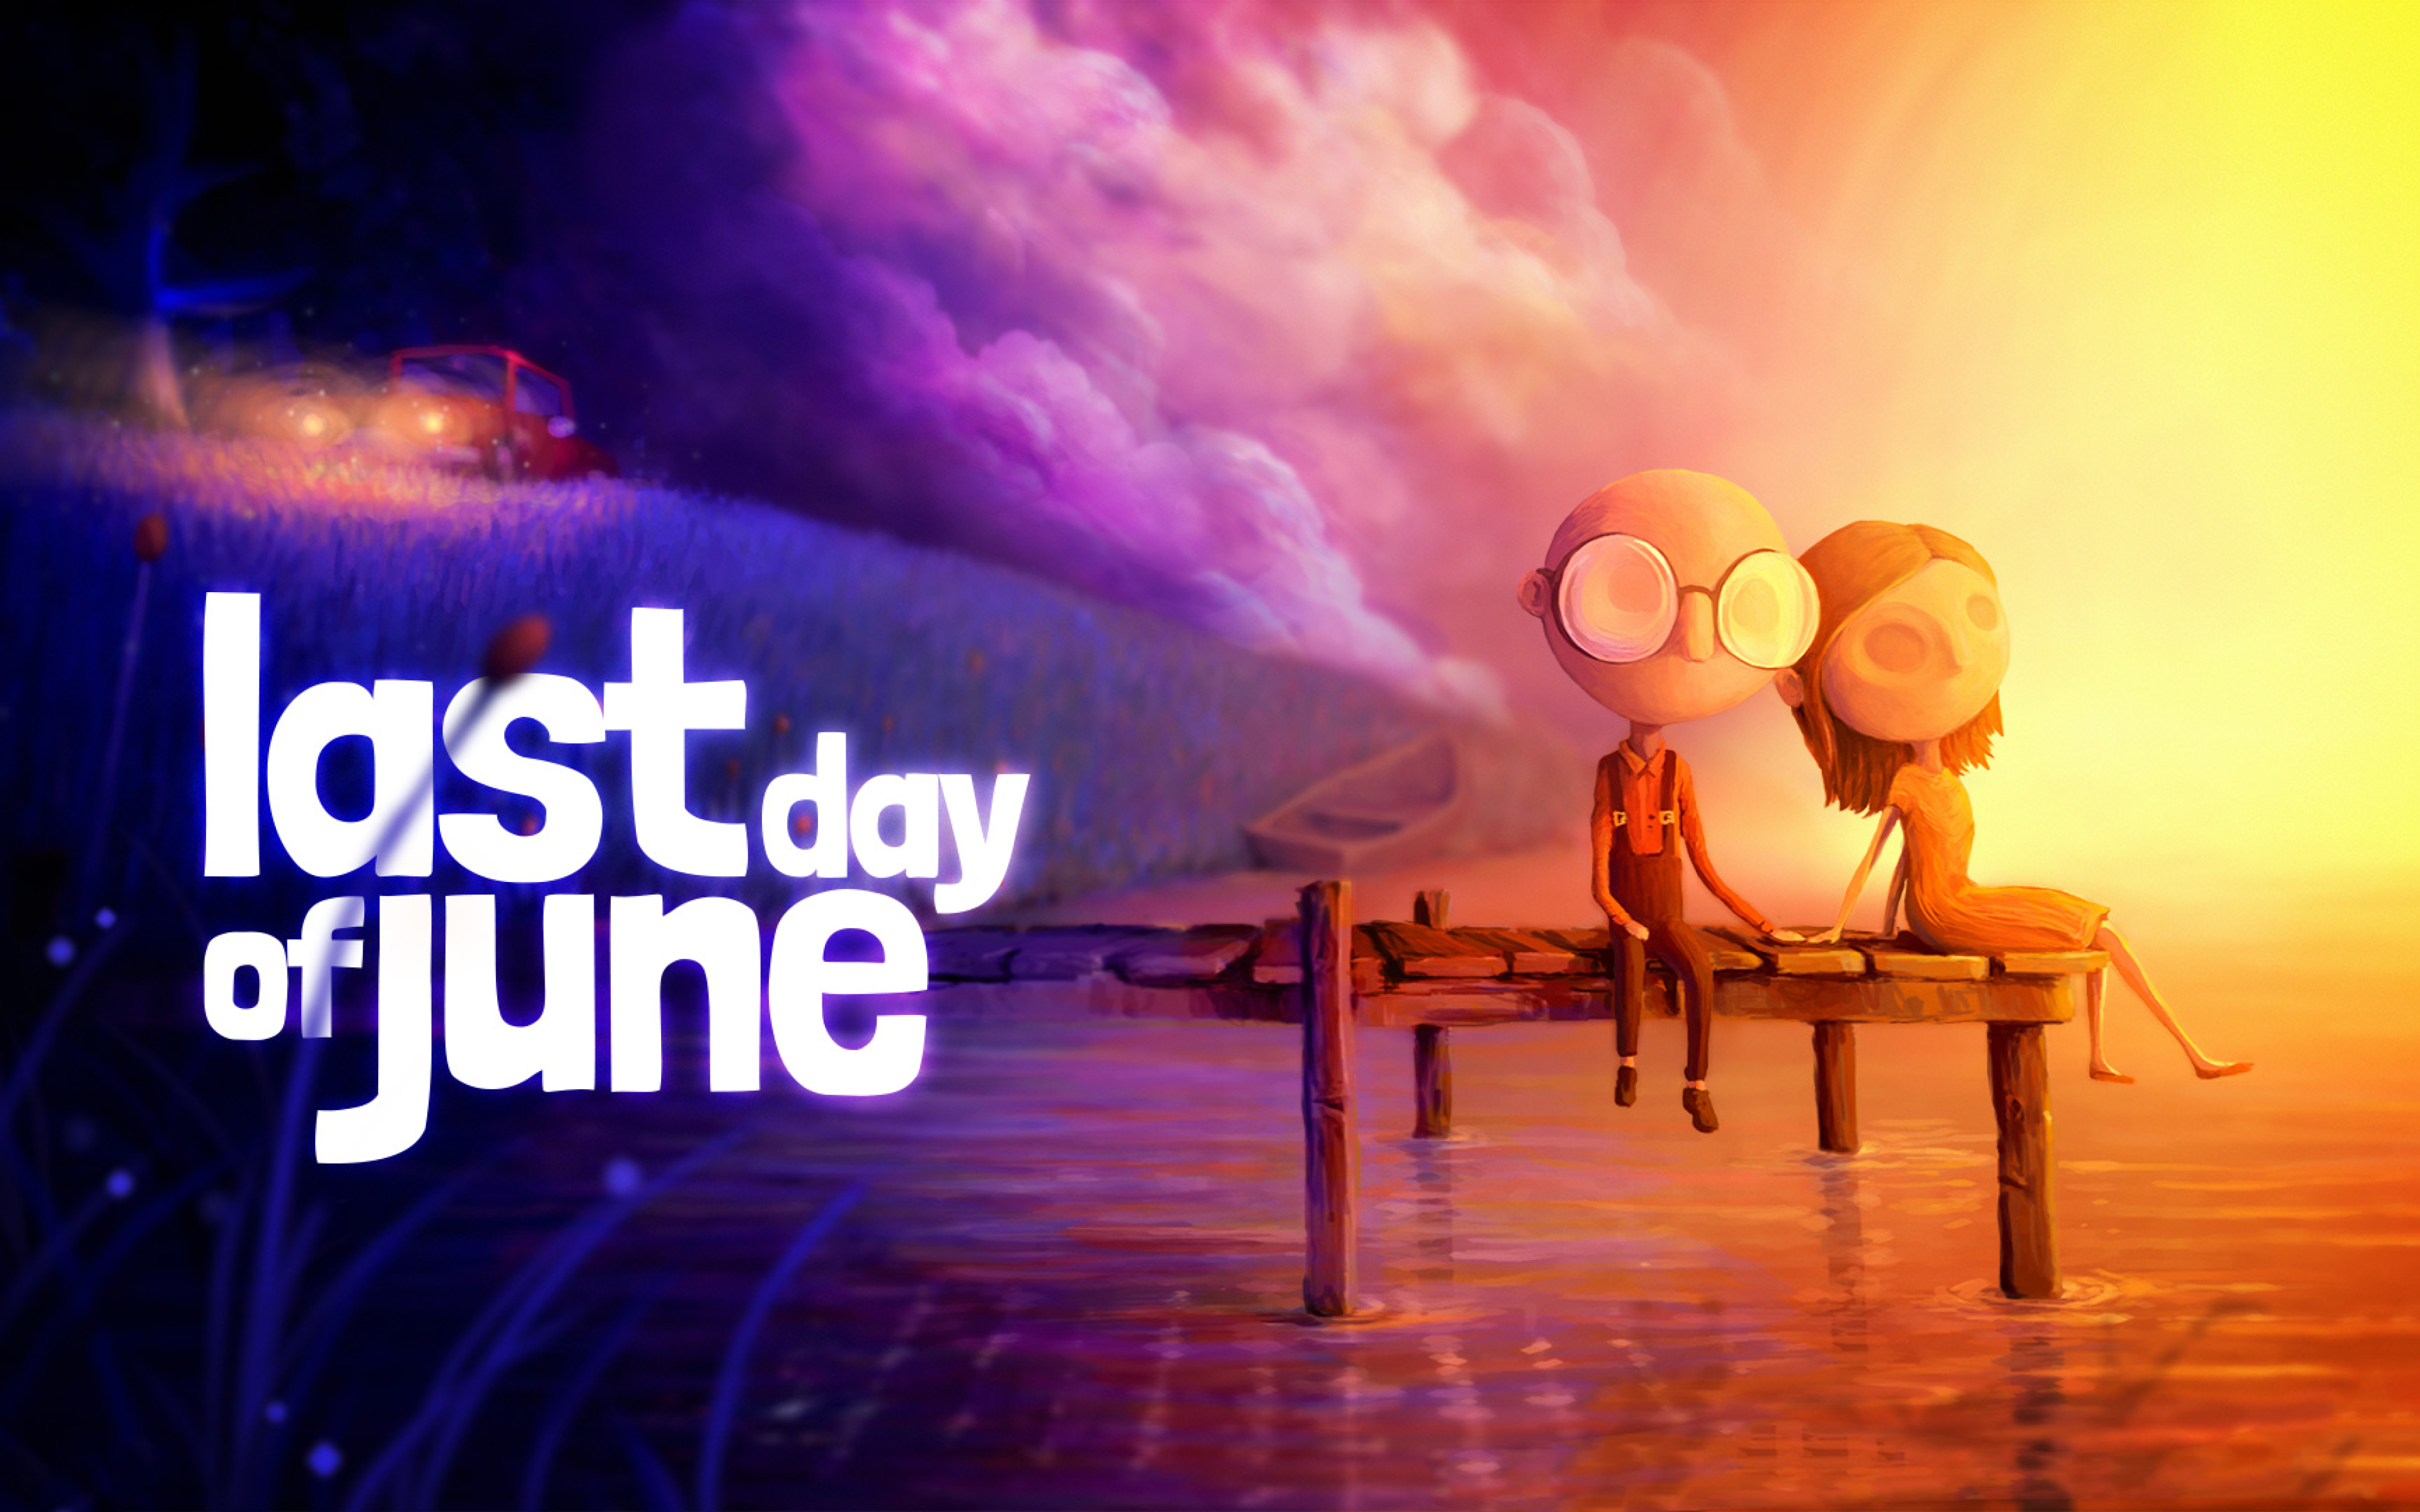 Last day of month. Игра last Day of June. 505 Games игры. Last Day of June PC. Last on Day картинки.